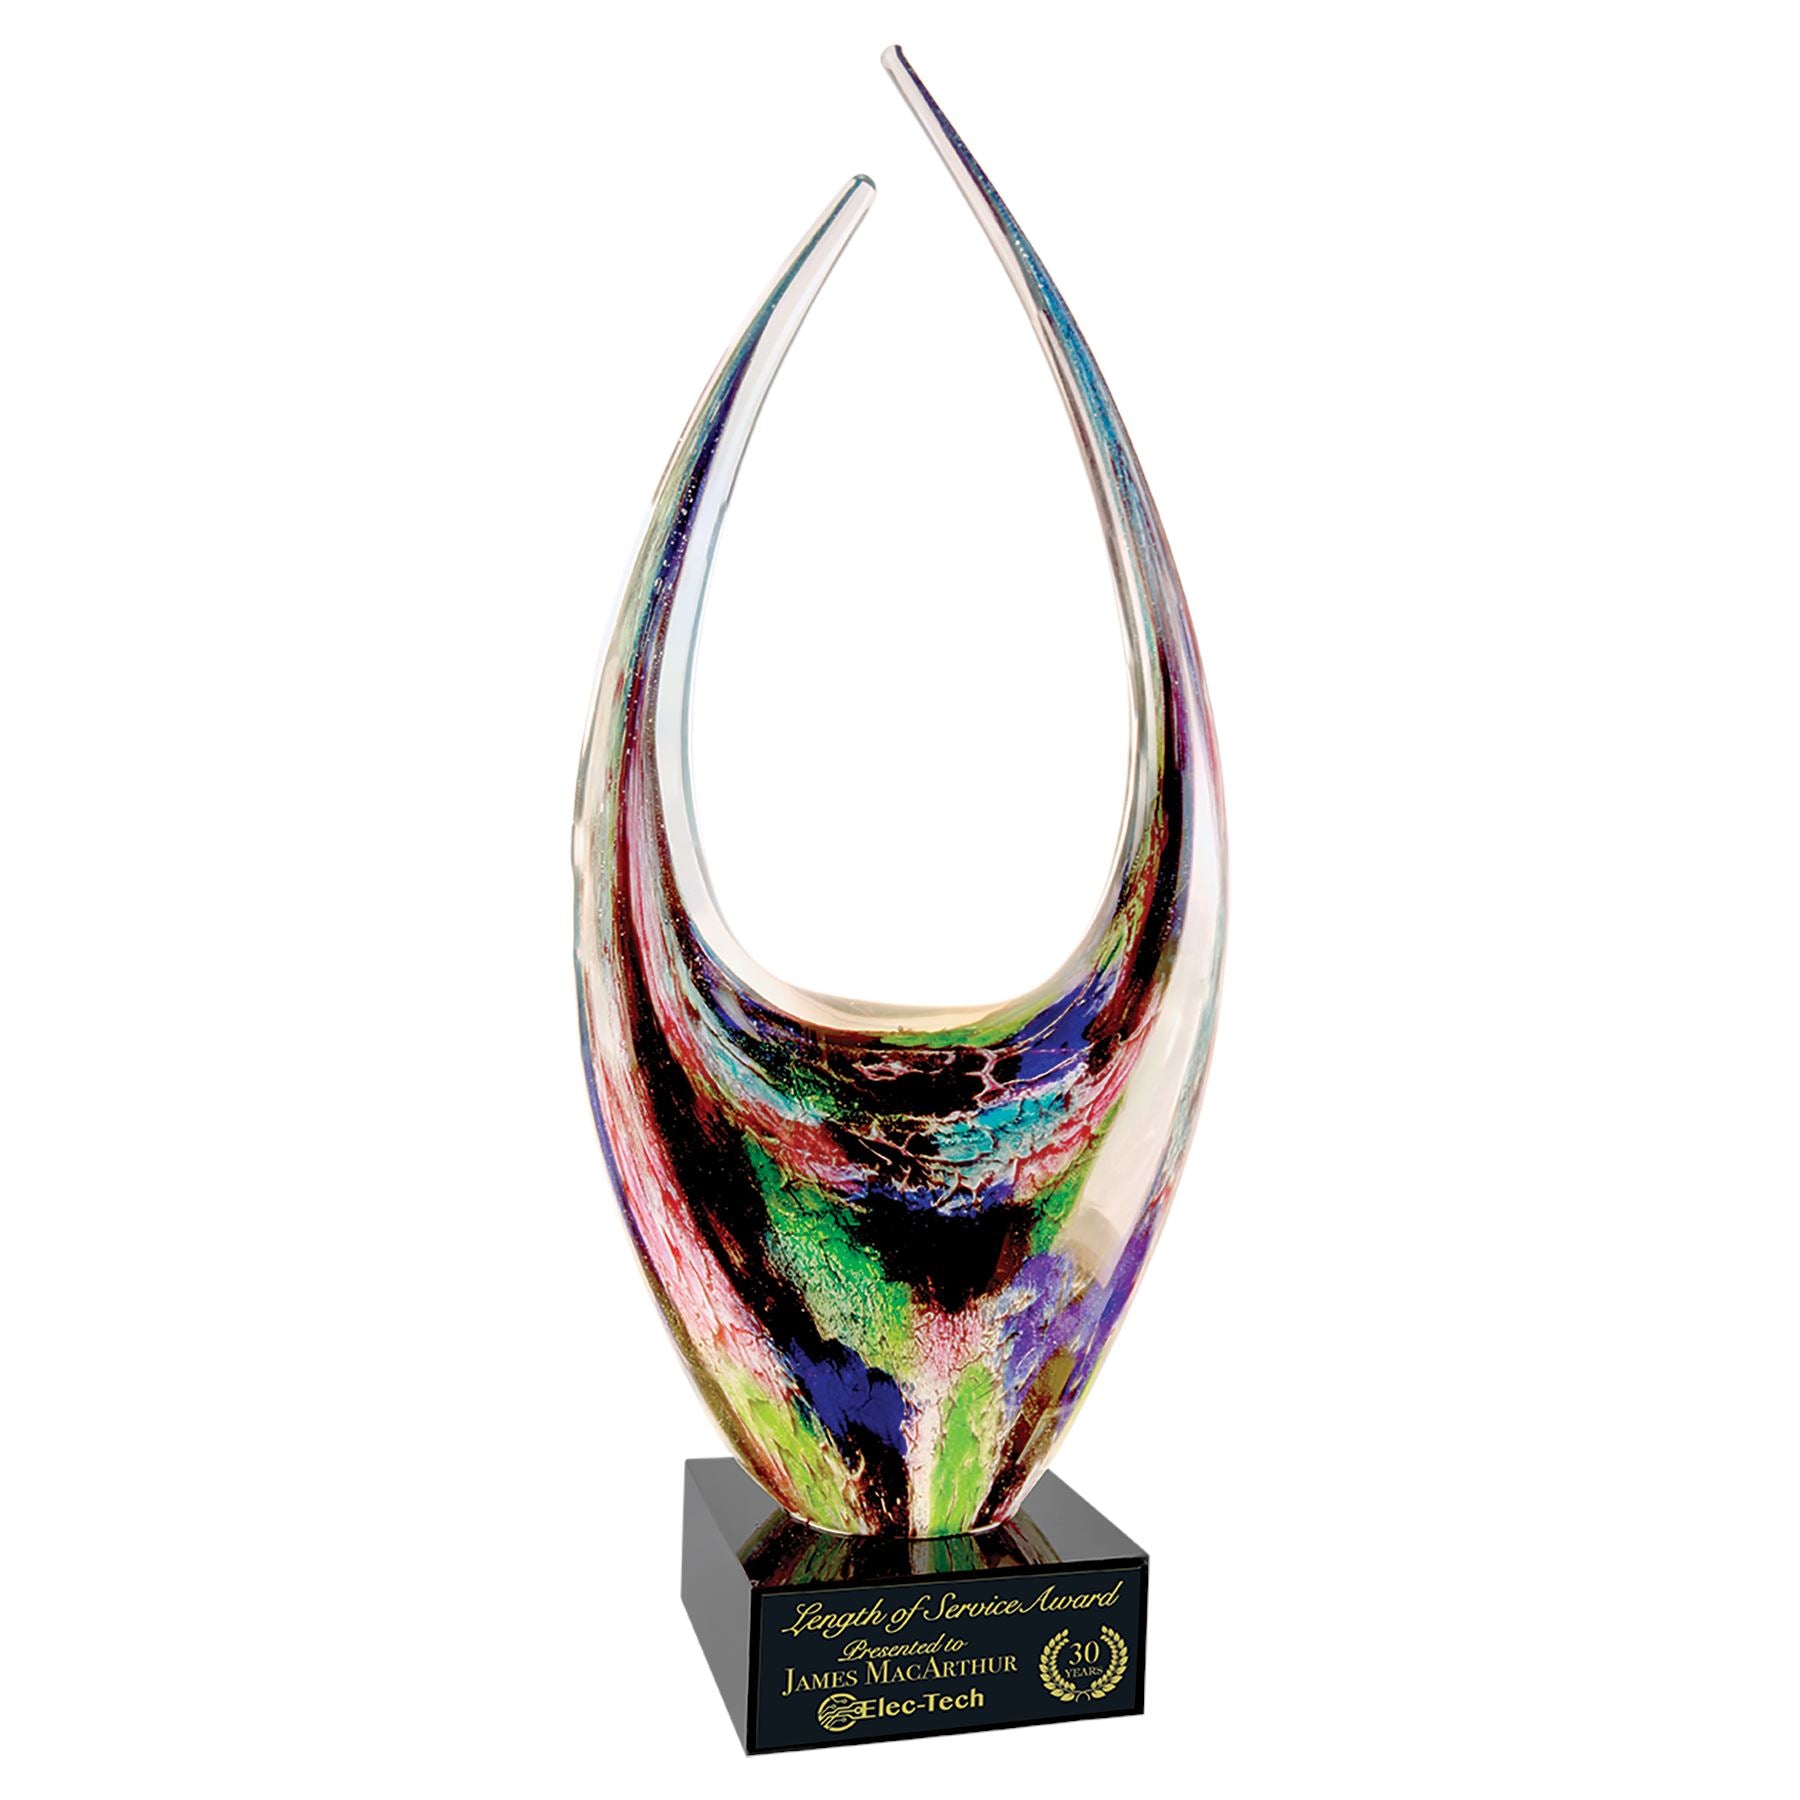 Dual Rising Art Glass with Square Black Base, 16 3/4" Art Glass Award, Laser Engraved Art Glass Craftworks NW 